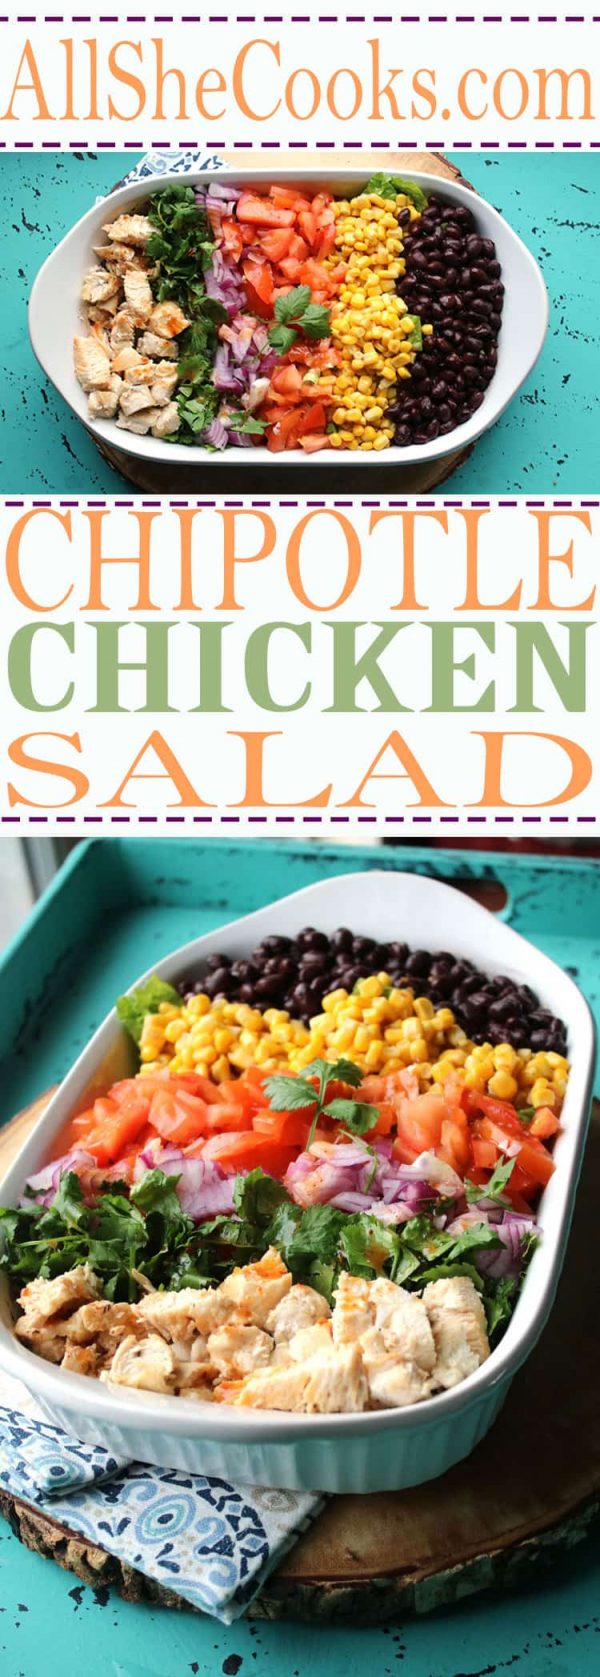 Chopped Chicken Chipotle Salad - a Healthy Dinner Recipe - All She Cooks